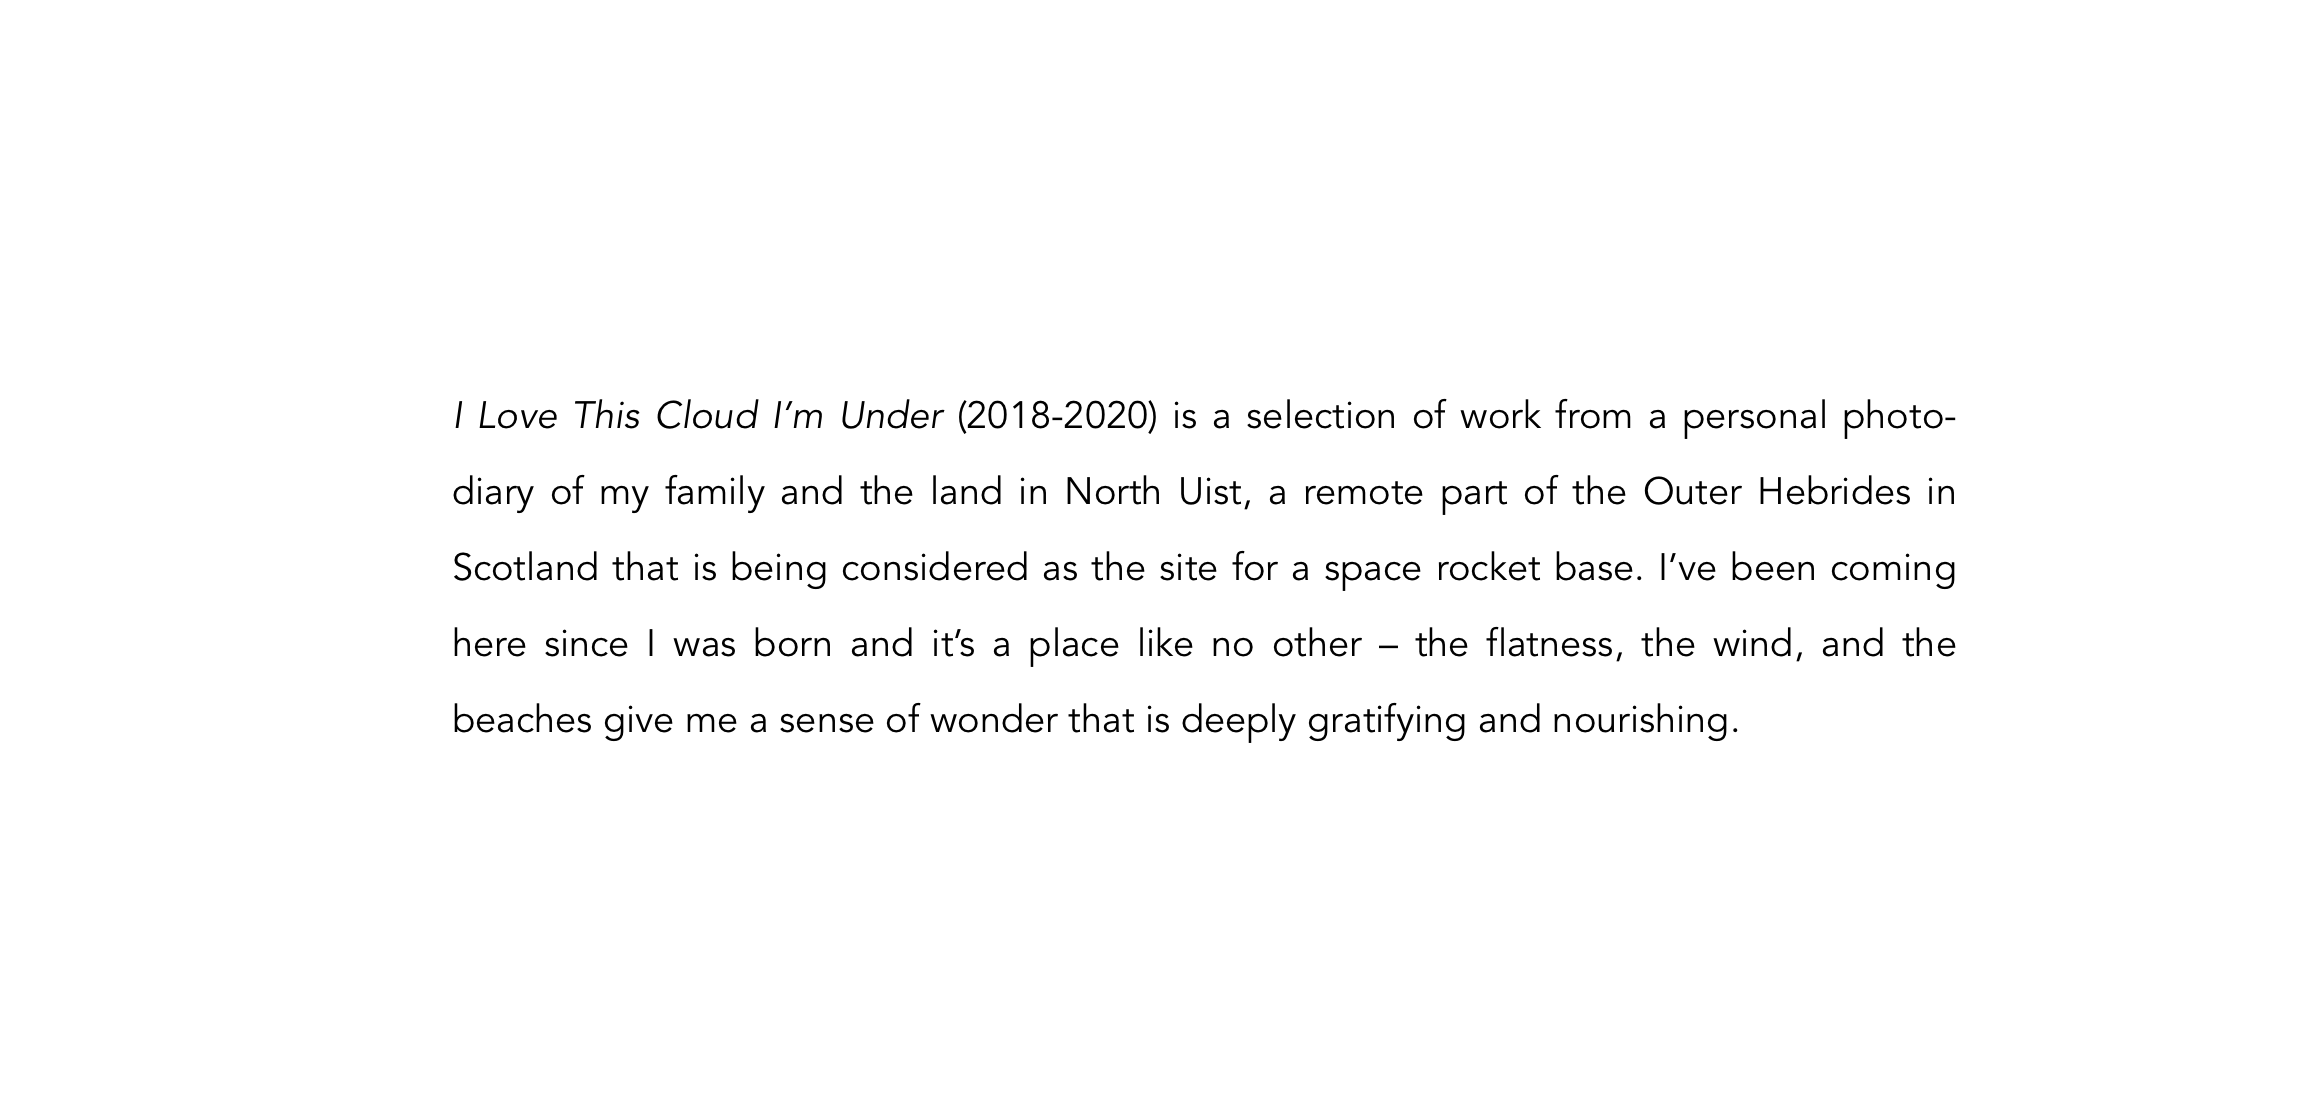 I Love This Cloud I'm Under Statement Caleb Stein.png